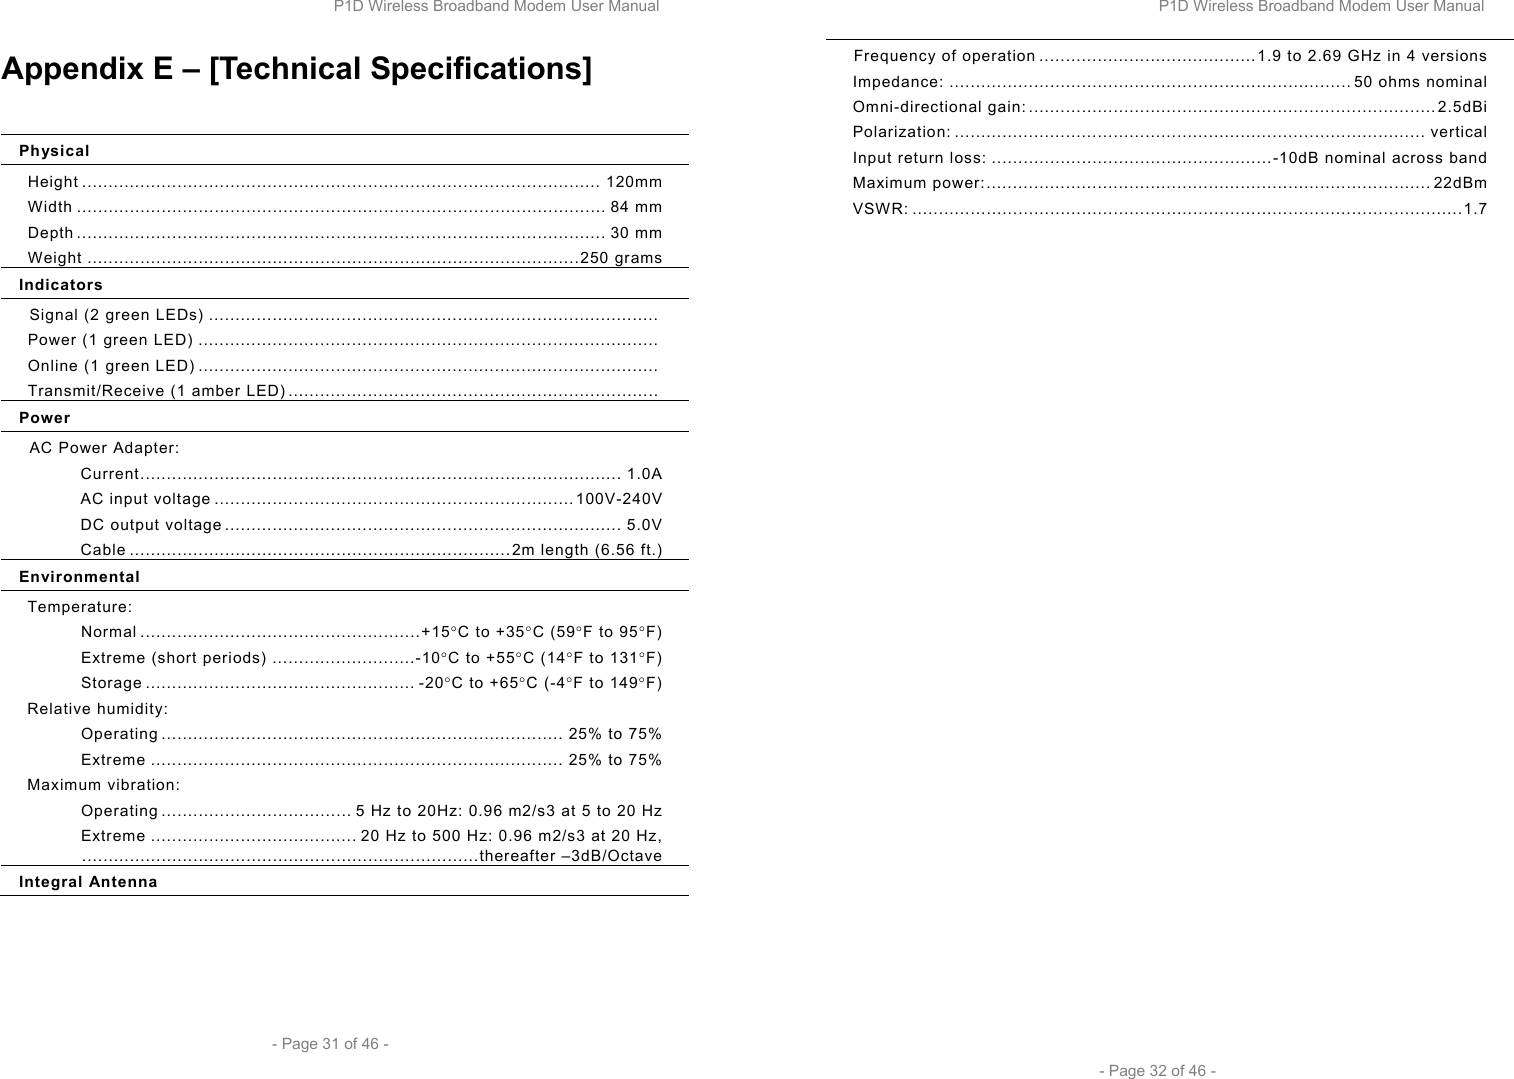 P1D Wireless Broadband Modem User Manual  - Page 31 of 46 -  Appendix E – [Technical Specifications]  Physical Height .................................................................................................. 120mm Width .................................................................................................... 84 mm  Depth .................................................................................................... 30 mm Weight .............................................................................................250 grams Indicators Signal (2 green LEDs) .....................................................................................  Power (1 green LED) .......................................................................................  Online (1 green LED) .......................................................................................  Transmit/Receive (1 amber LED) ......................................................................  Power AC Power Adapter: Current........................................................................................... 1.0A AC input voltage ....................................................................100V-240V DC output voltage ........................................................................... 5.0V Cable ........................................................................2m length (6.56 ft.) Environmental Temperature: Normal .....................................................+15°C to +35°C (59°F to 95°F) Extreme (short periods) ...........................-10°C to +55°C (14°F to 131°F) Storage ................................................... -20°C to +65°C (-4°F to 149°F) Relative humidity: Operating ............................................................................ 25% to 75% Extreme .............................................................................. 25% to 75% Maximum vibration: Operating .................................... 5 Hz to 20Hz: 0.96 m2/s3 at 5 to 20 Hz Extreme ....................................... 20 Hz to 500 Hz: 0.96 m2/s3 at 20 Hz,  ...........................................................................thereafter –3dB/Octave Integral Antenna P1D Wireless Broadband Modem User Manual  - Page 32 of 46 - Frequency of operation .........................................1.9 to 2.69 GHz in 4 versions Impedance: ............................................................................ 50 ohms nominal Omni-directional gain: .............................................................................2.5dBi Polarization: ......................................................................................... vertical Input return loss: .....................................................-10dB nominal across band Maximum power:.................................................................................... 22dBm VSWR: ........................................................................................................1.7 